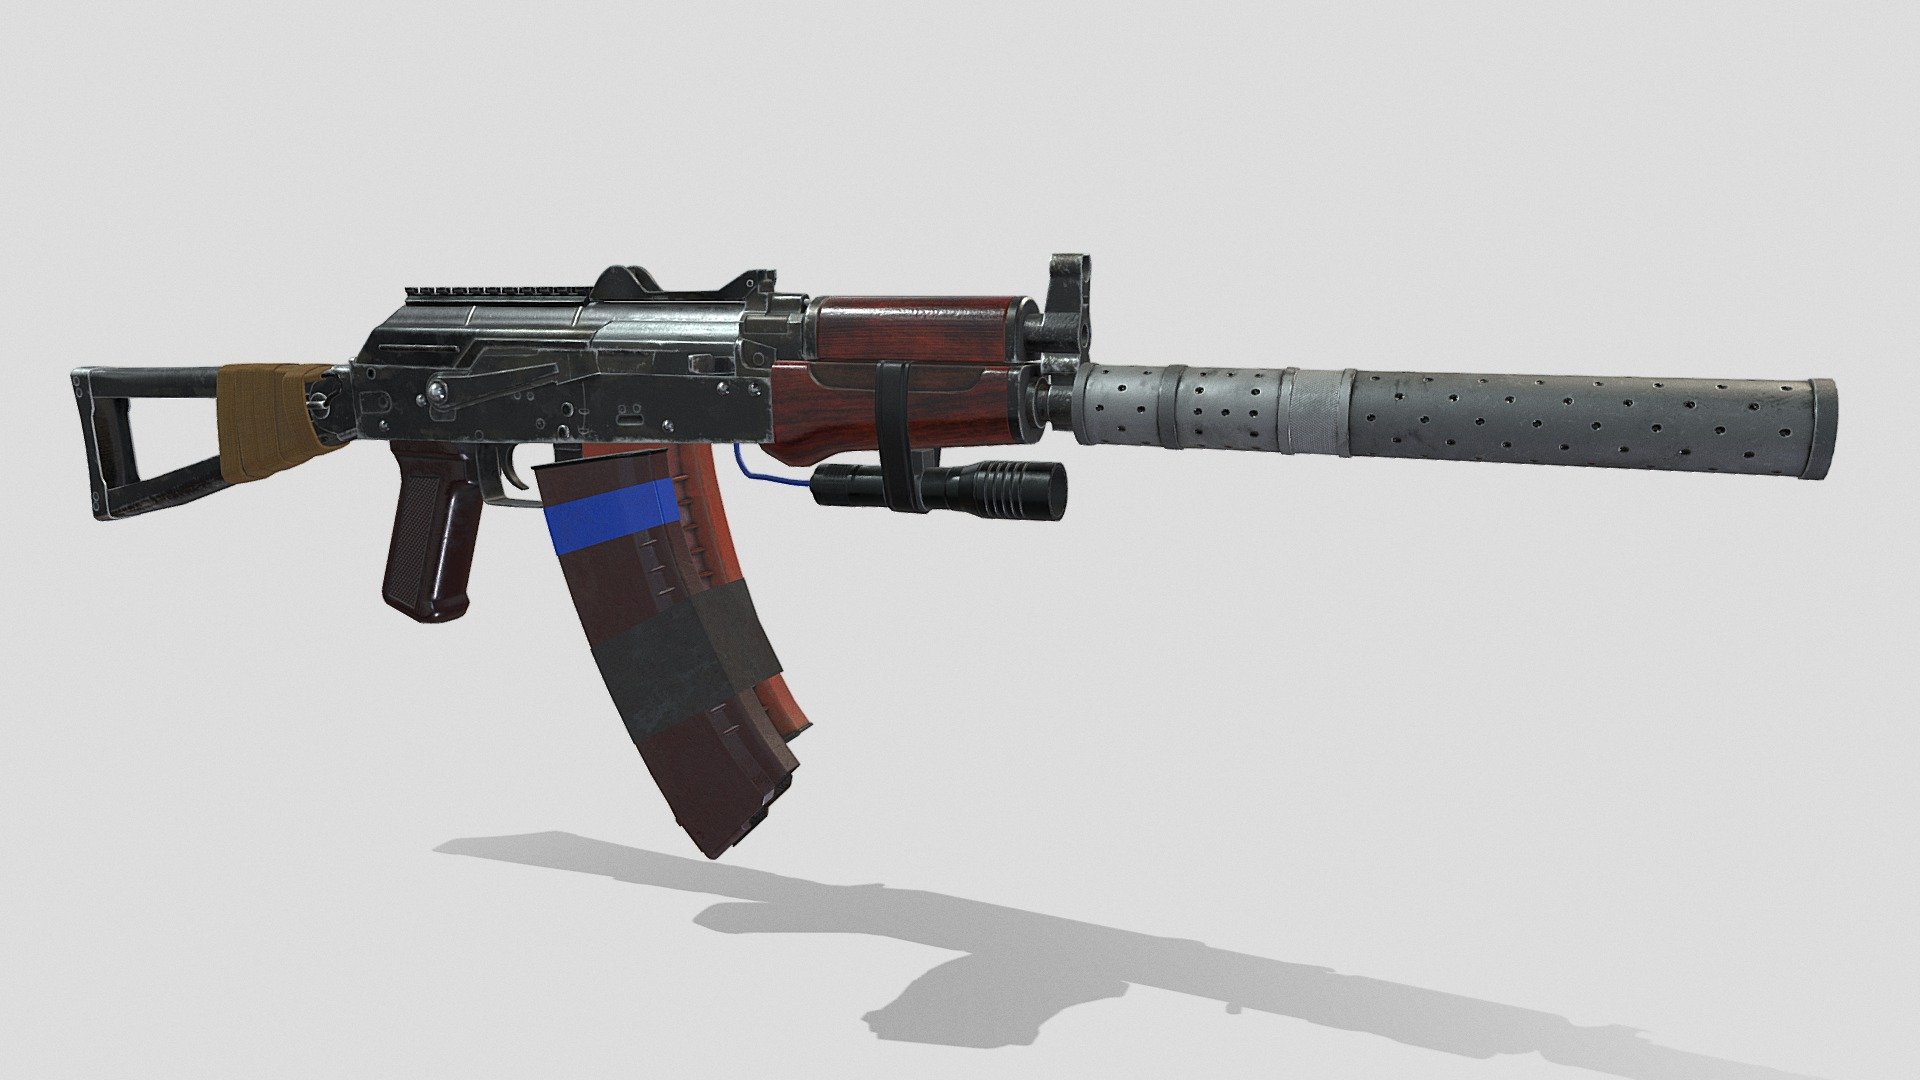 Hello guys This is my new 3d model - AKS 74U MOD.1 For game Word War Apocalypse.
WWA is DWG Studio's debut Survival and FPS project - AKS 74U MOD.1 - 3D model by SHPAK.EXE 3d model